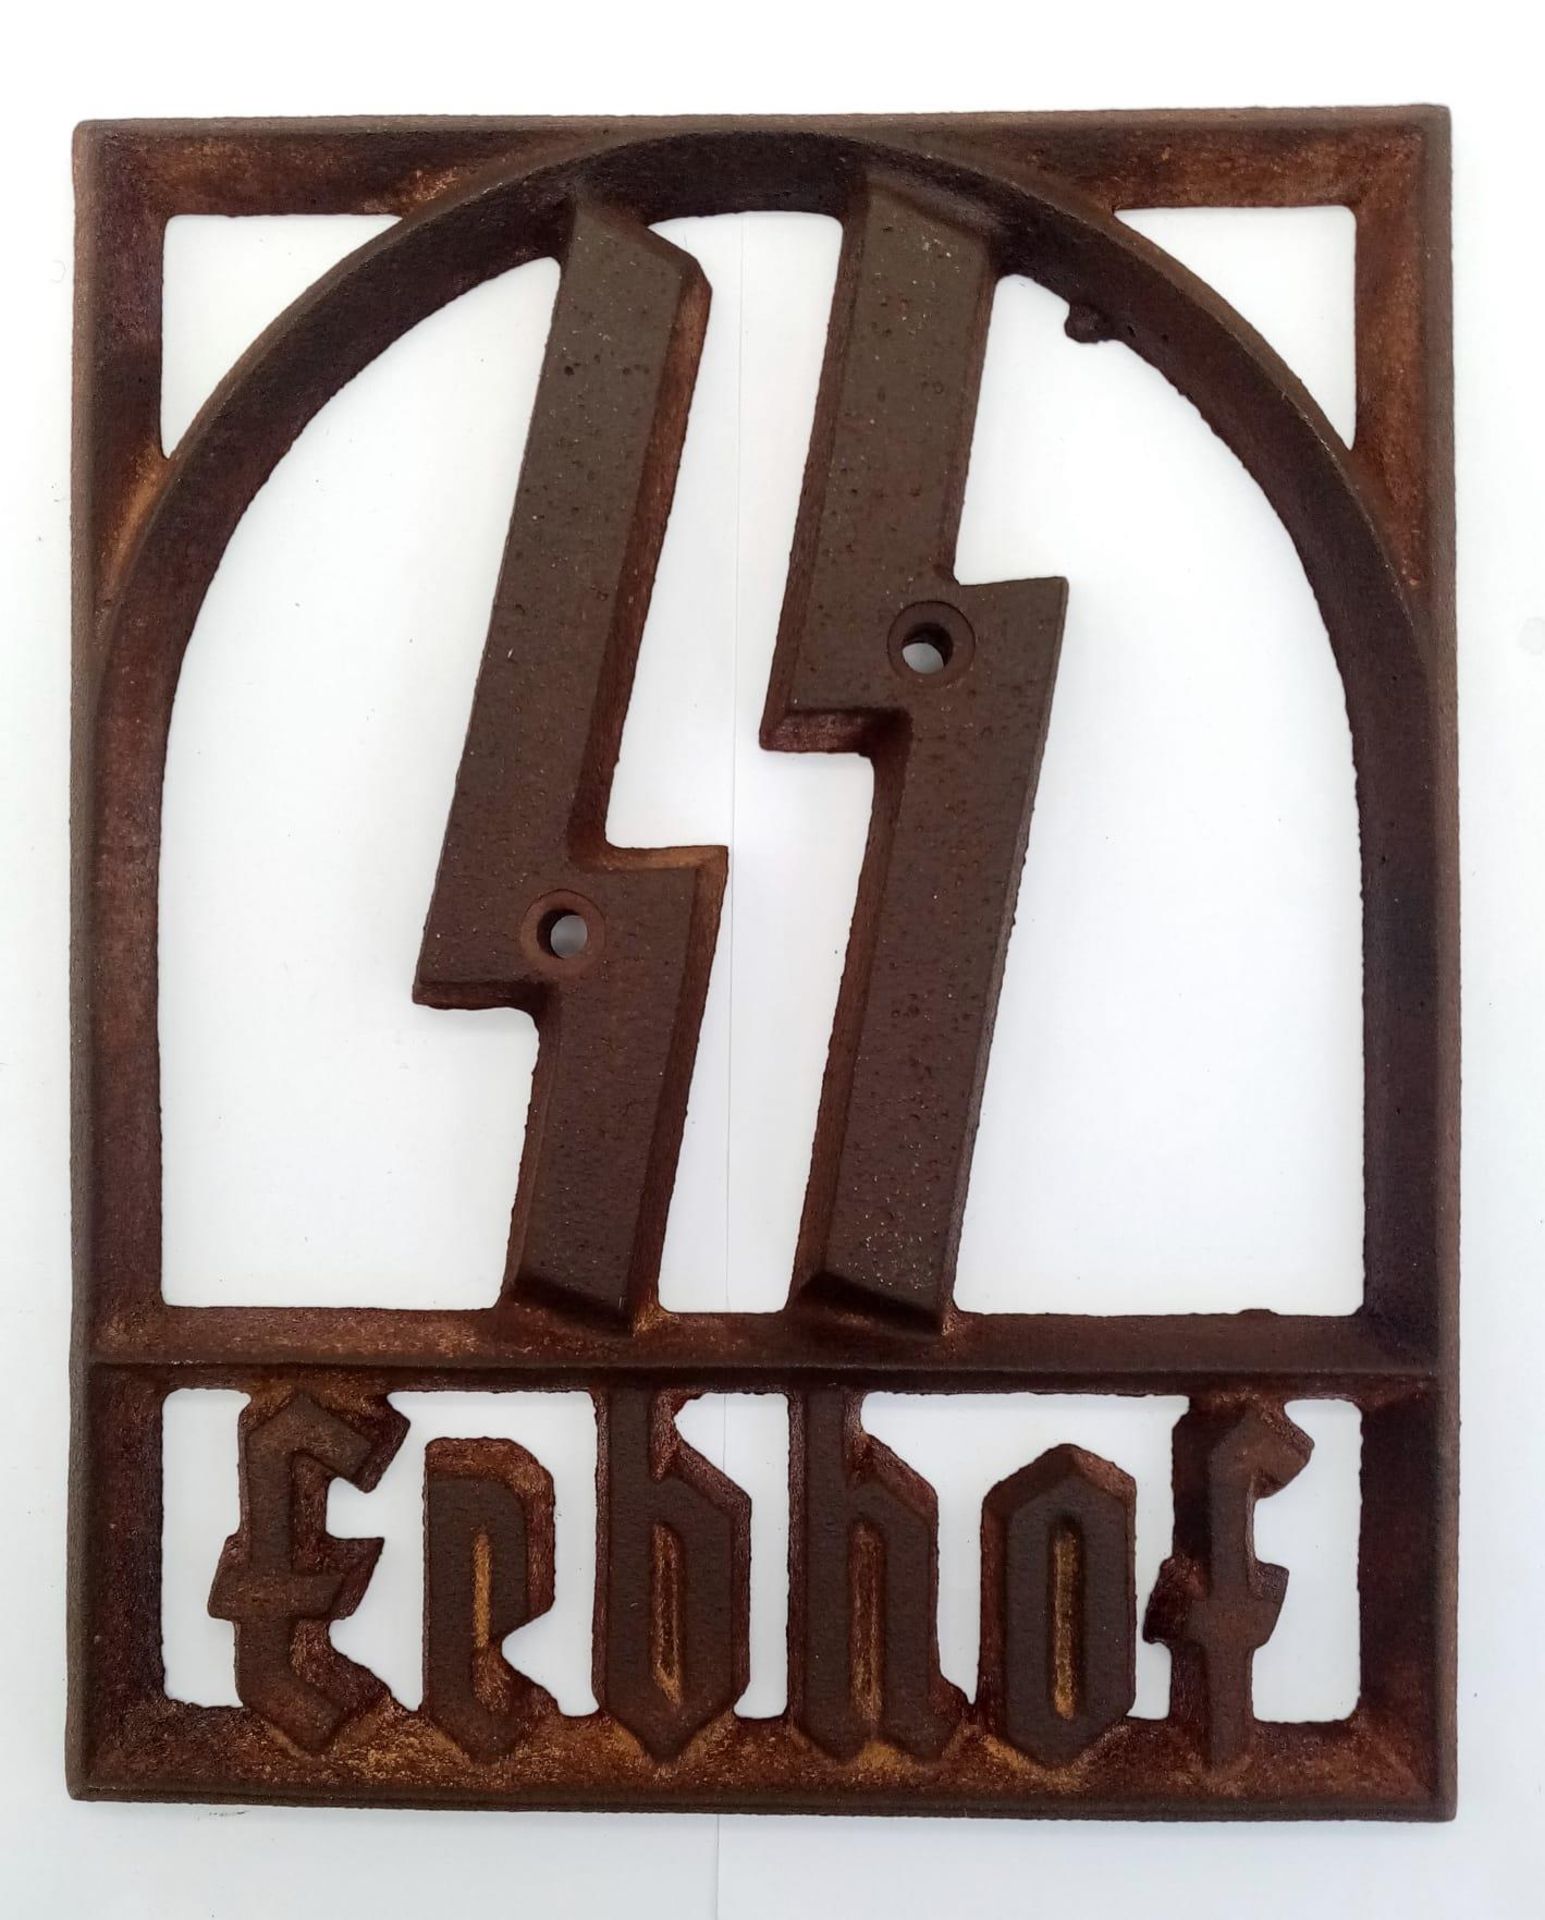 3rd Reich Erbhof (Hereditary Farm) Iron Plaque Depicting SS Runes. These were mounted to farm